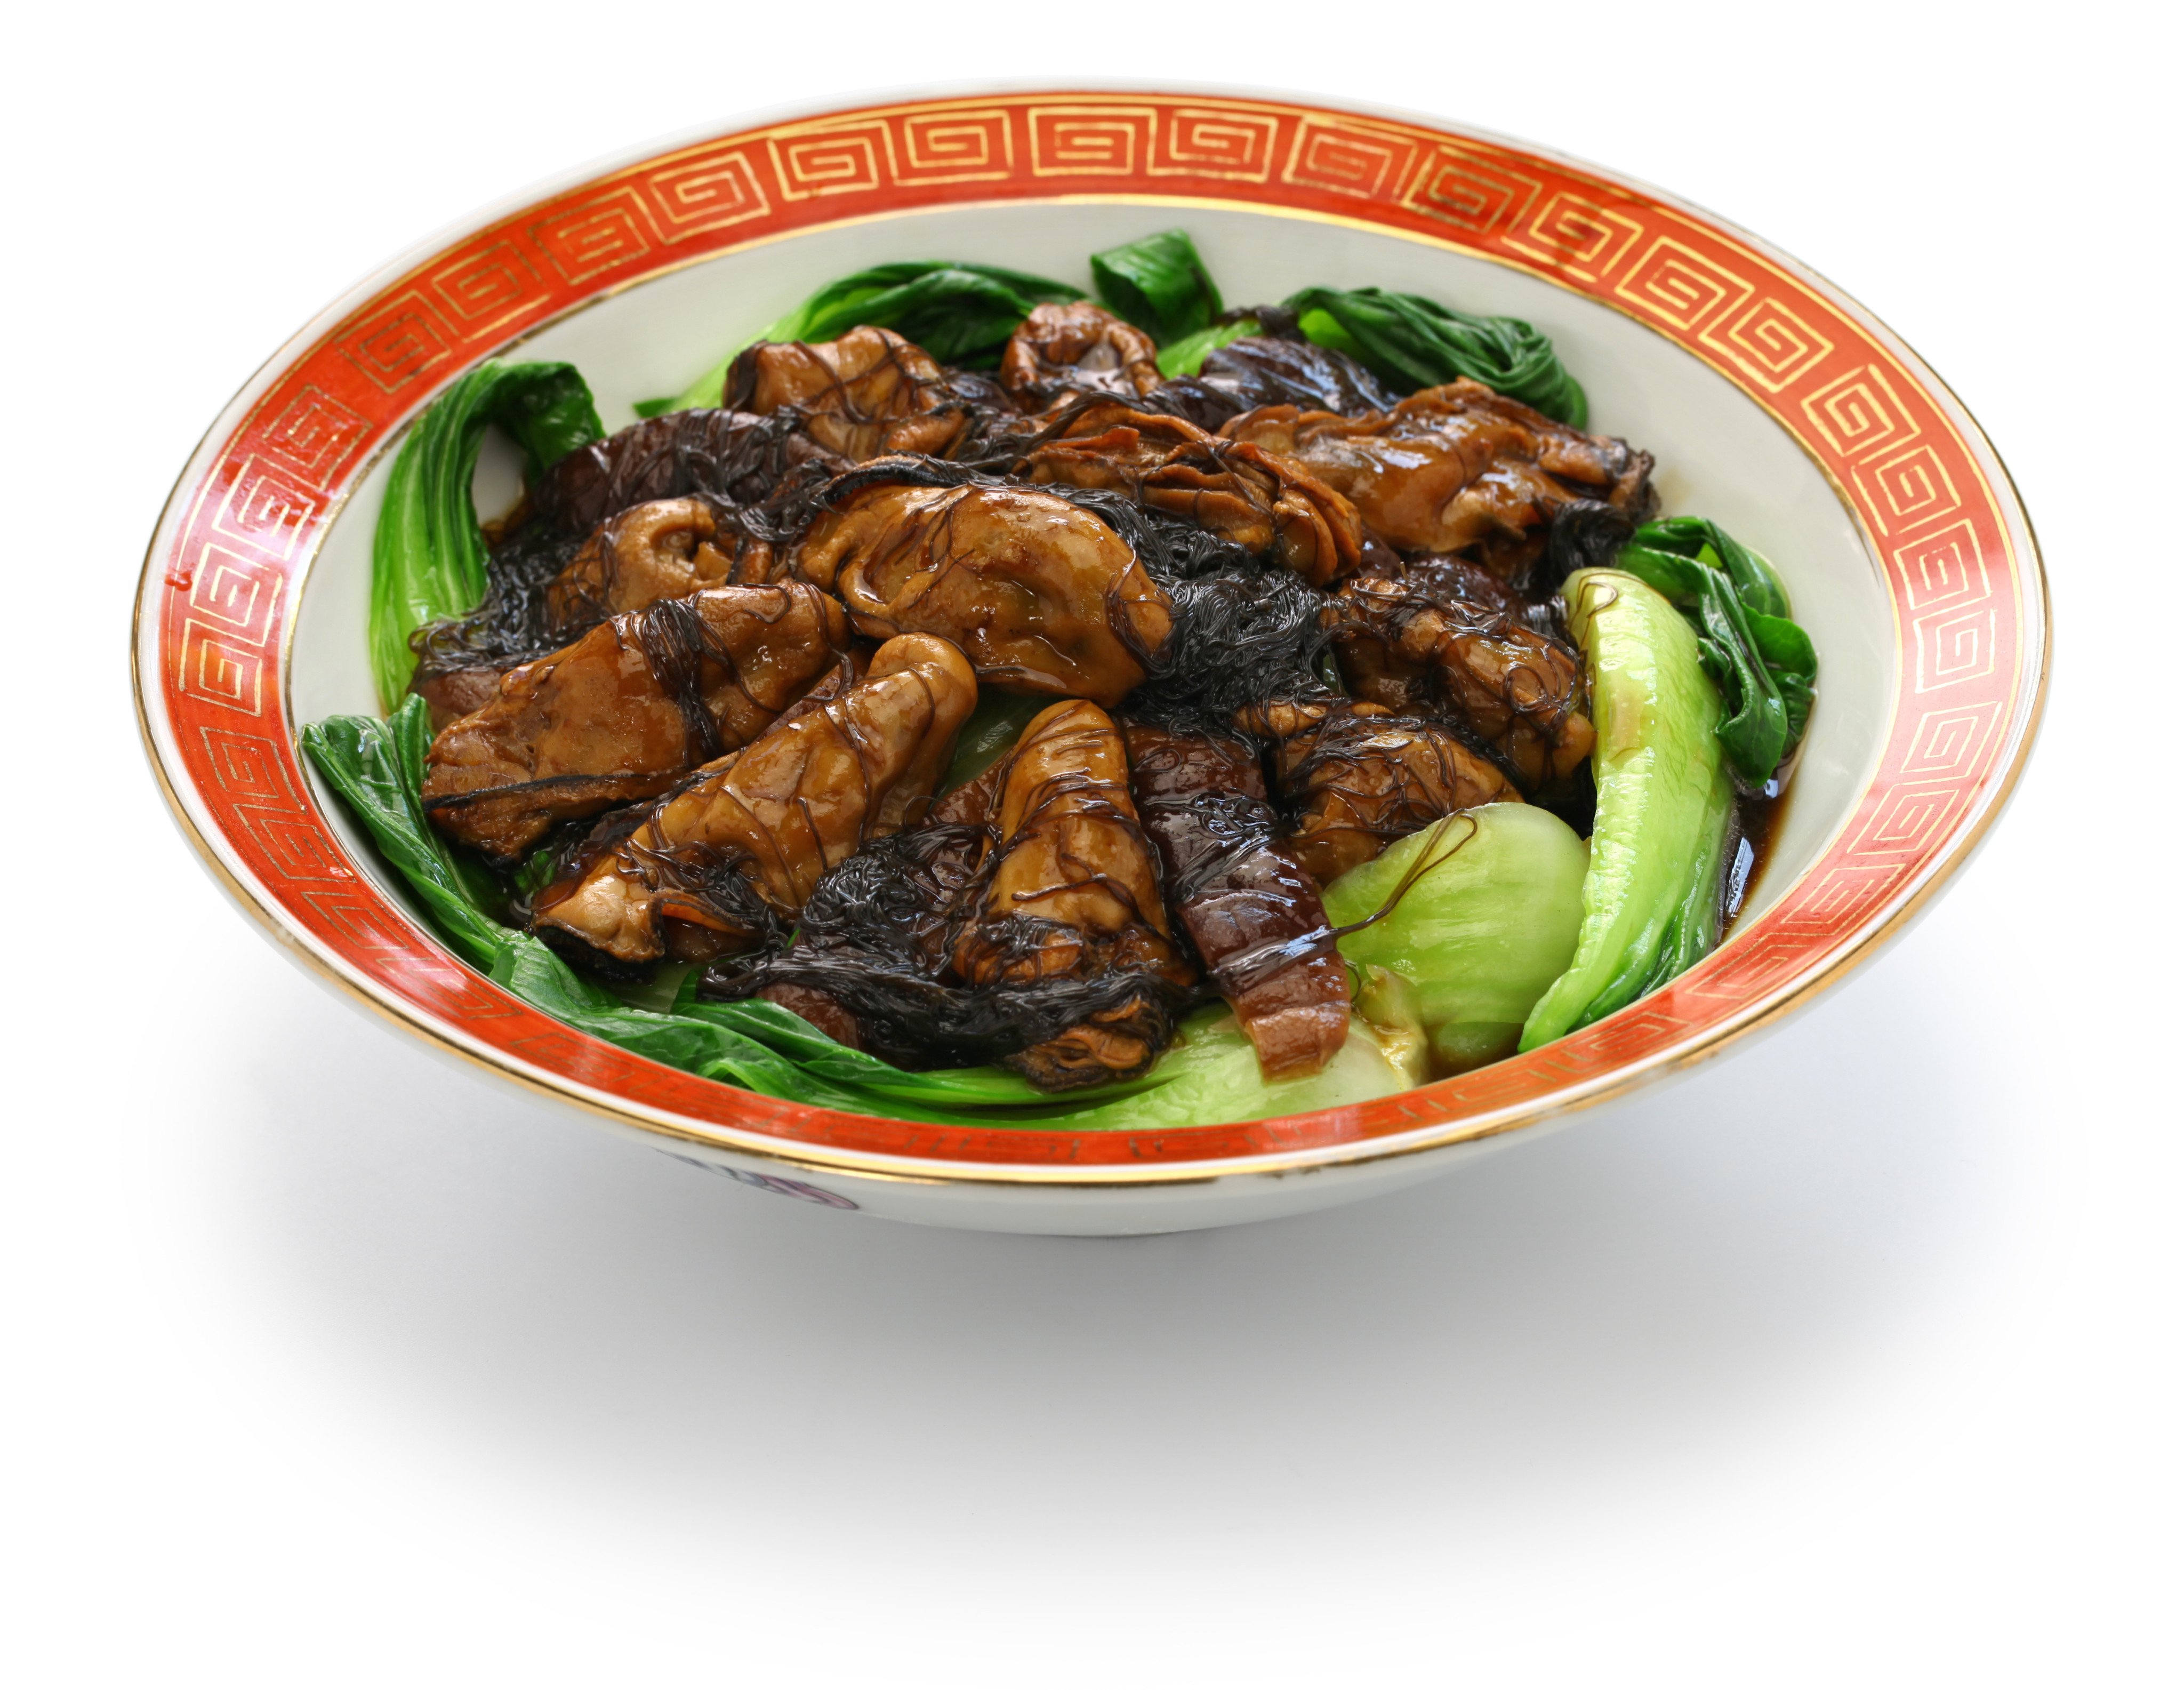 Braised dried oysters with black moss (ho see fat choy ), a traditional Chinese new year dish. Photo: Shutterstock